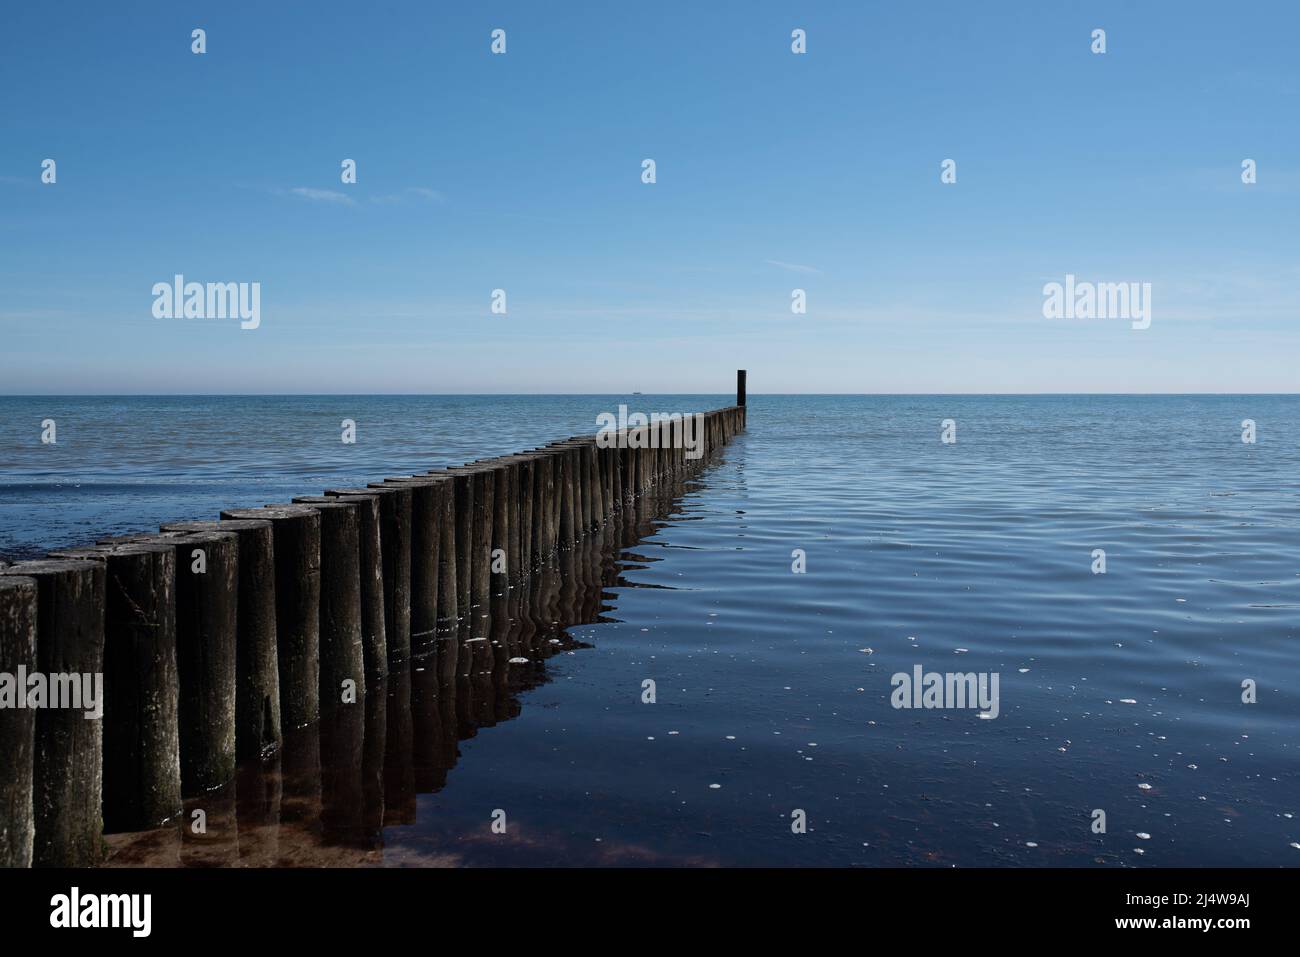 maritime background, wooden breakwater in calm baltic sea against blue sky Stock Photo